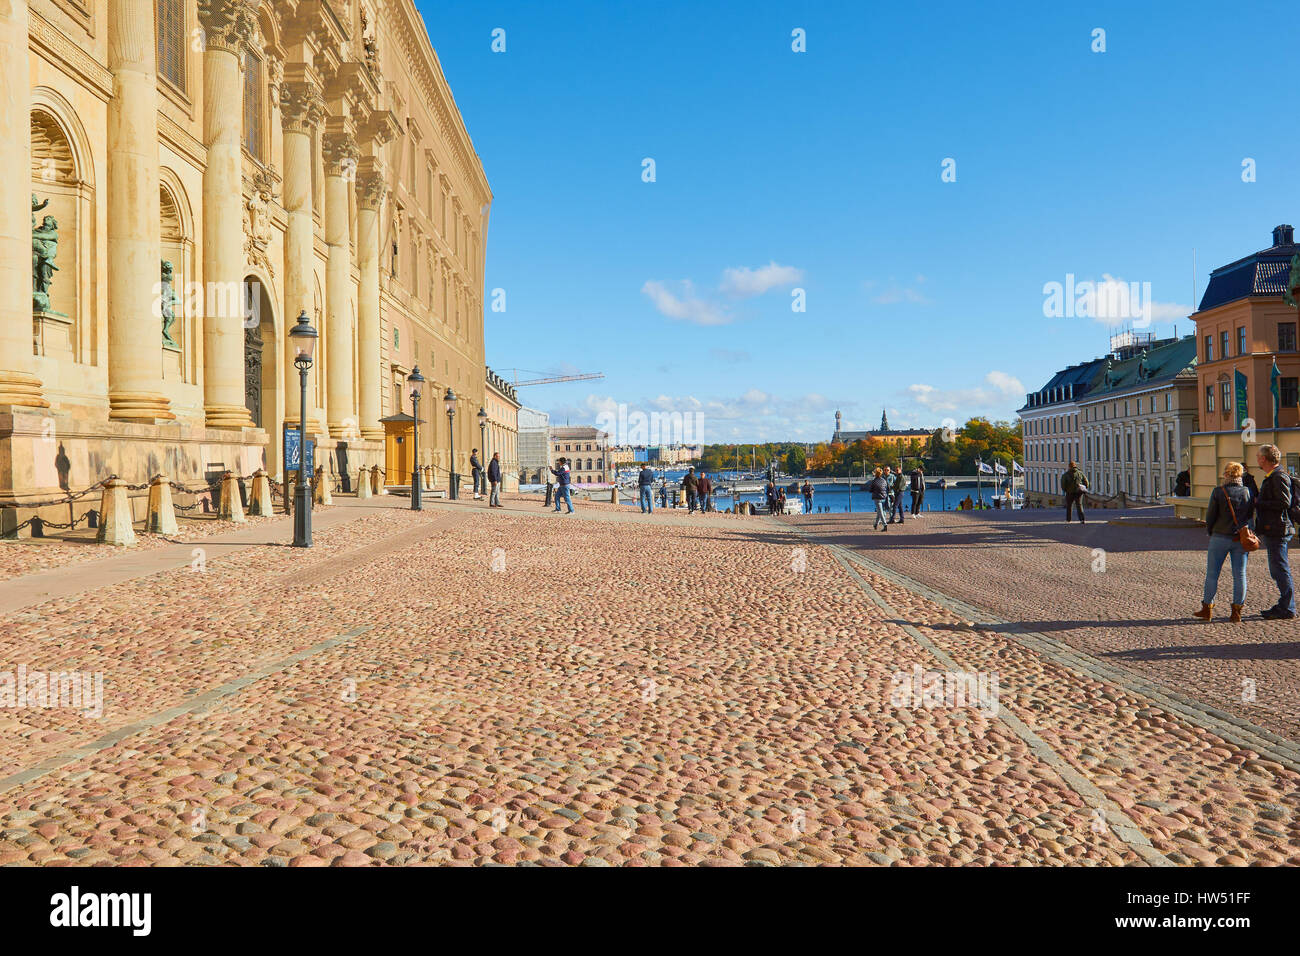 View from in front of the Royal Palace (Kungliga Slottet), Stockholm, Gamla Stan, Sweden, Scandinavia Stock Photo